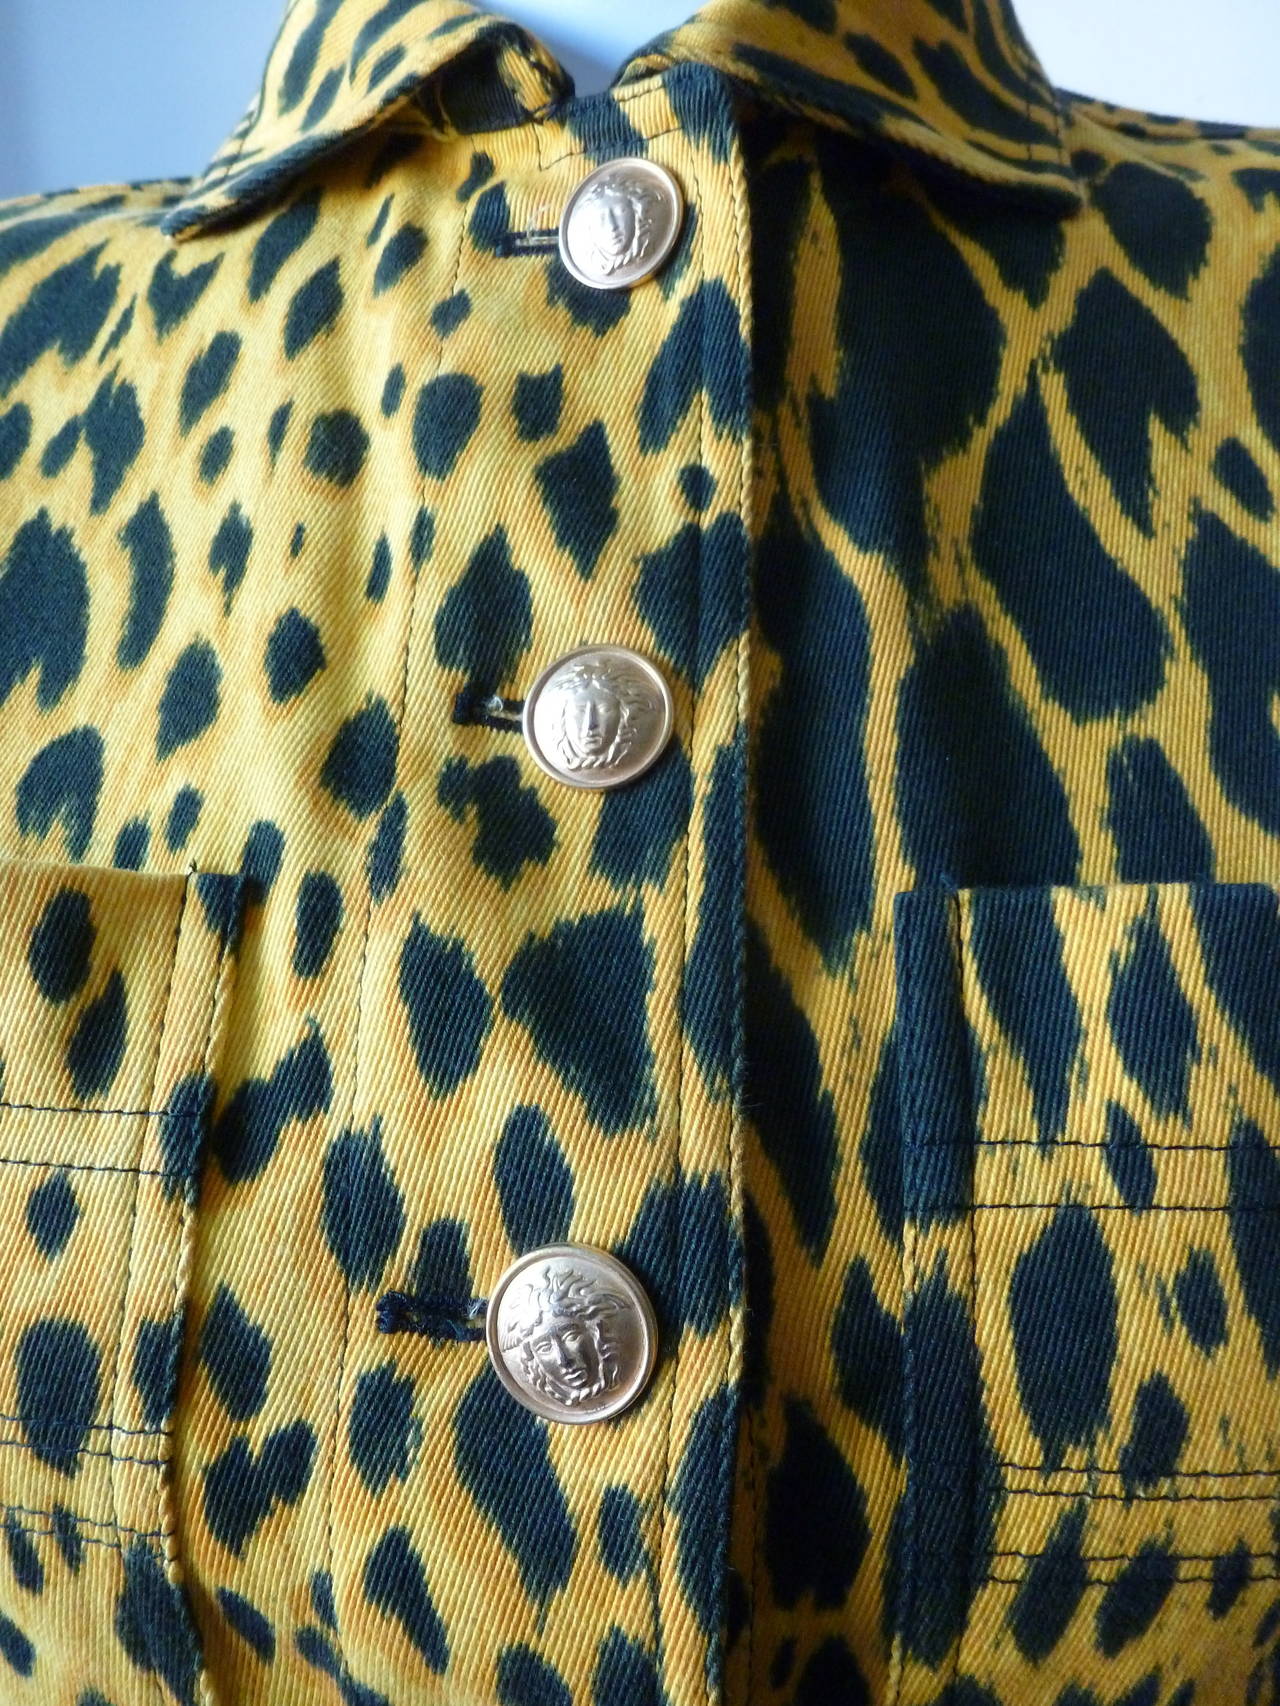 Gianni Versace gold and black animal print cotton jacket from the Spring 1992 collection. The jacket features two large pockets at the bust and is secured at the front and the cuffs by a series of gilt-tone metal Medusa embossed buttons.

Marked